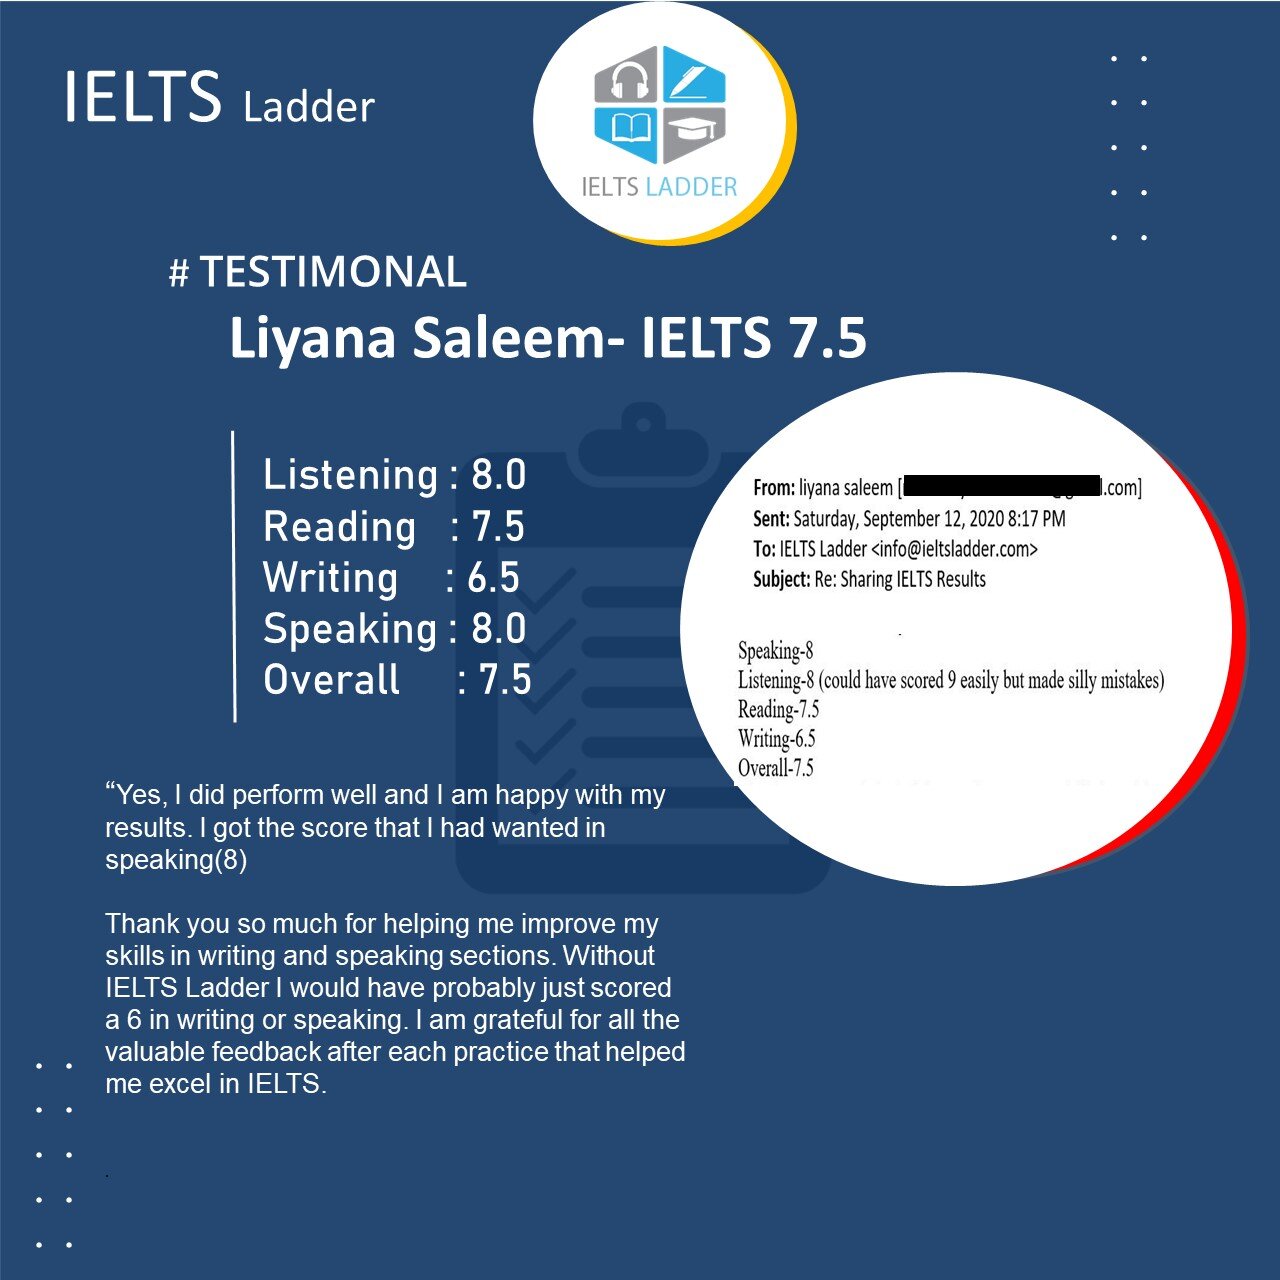 Our student Liyana get 7.5 bands in IELTS .